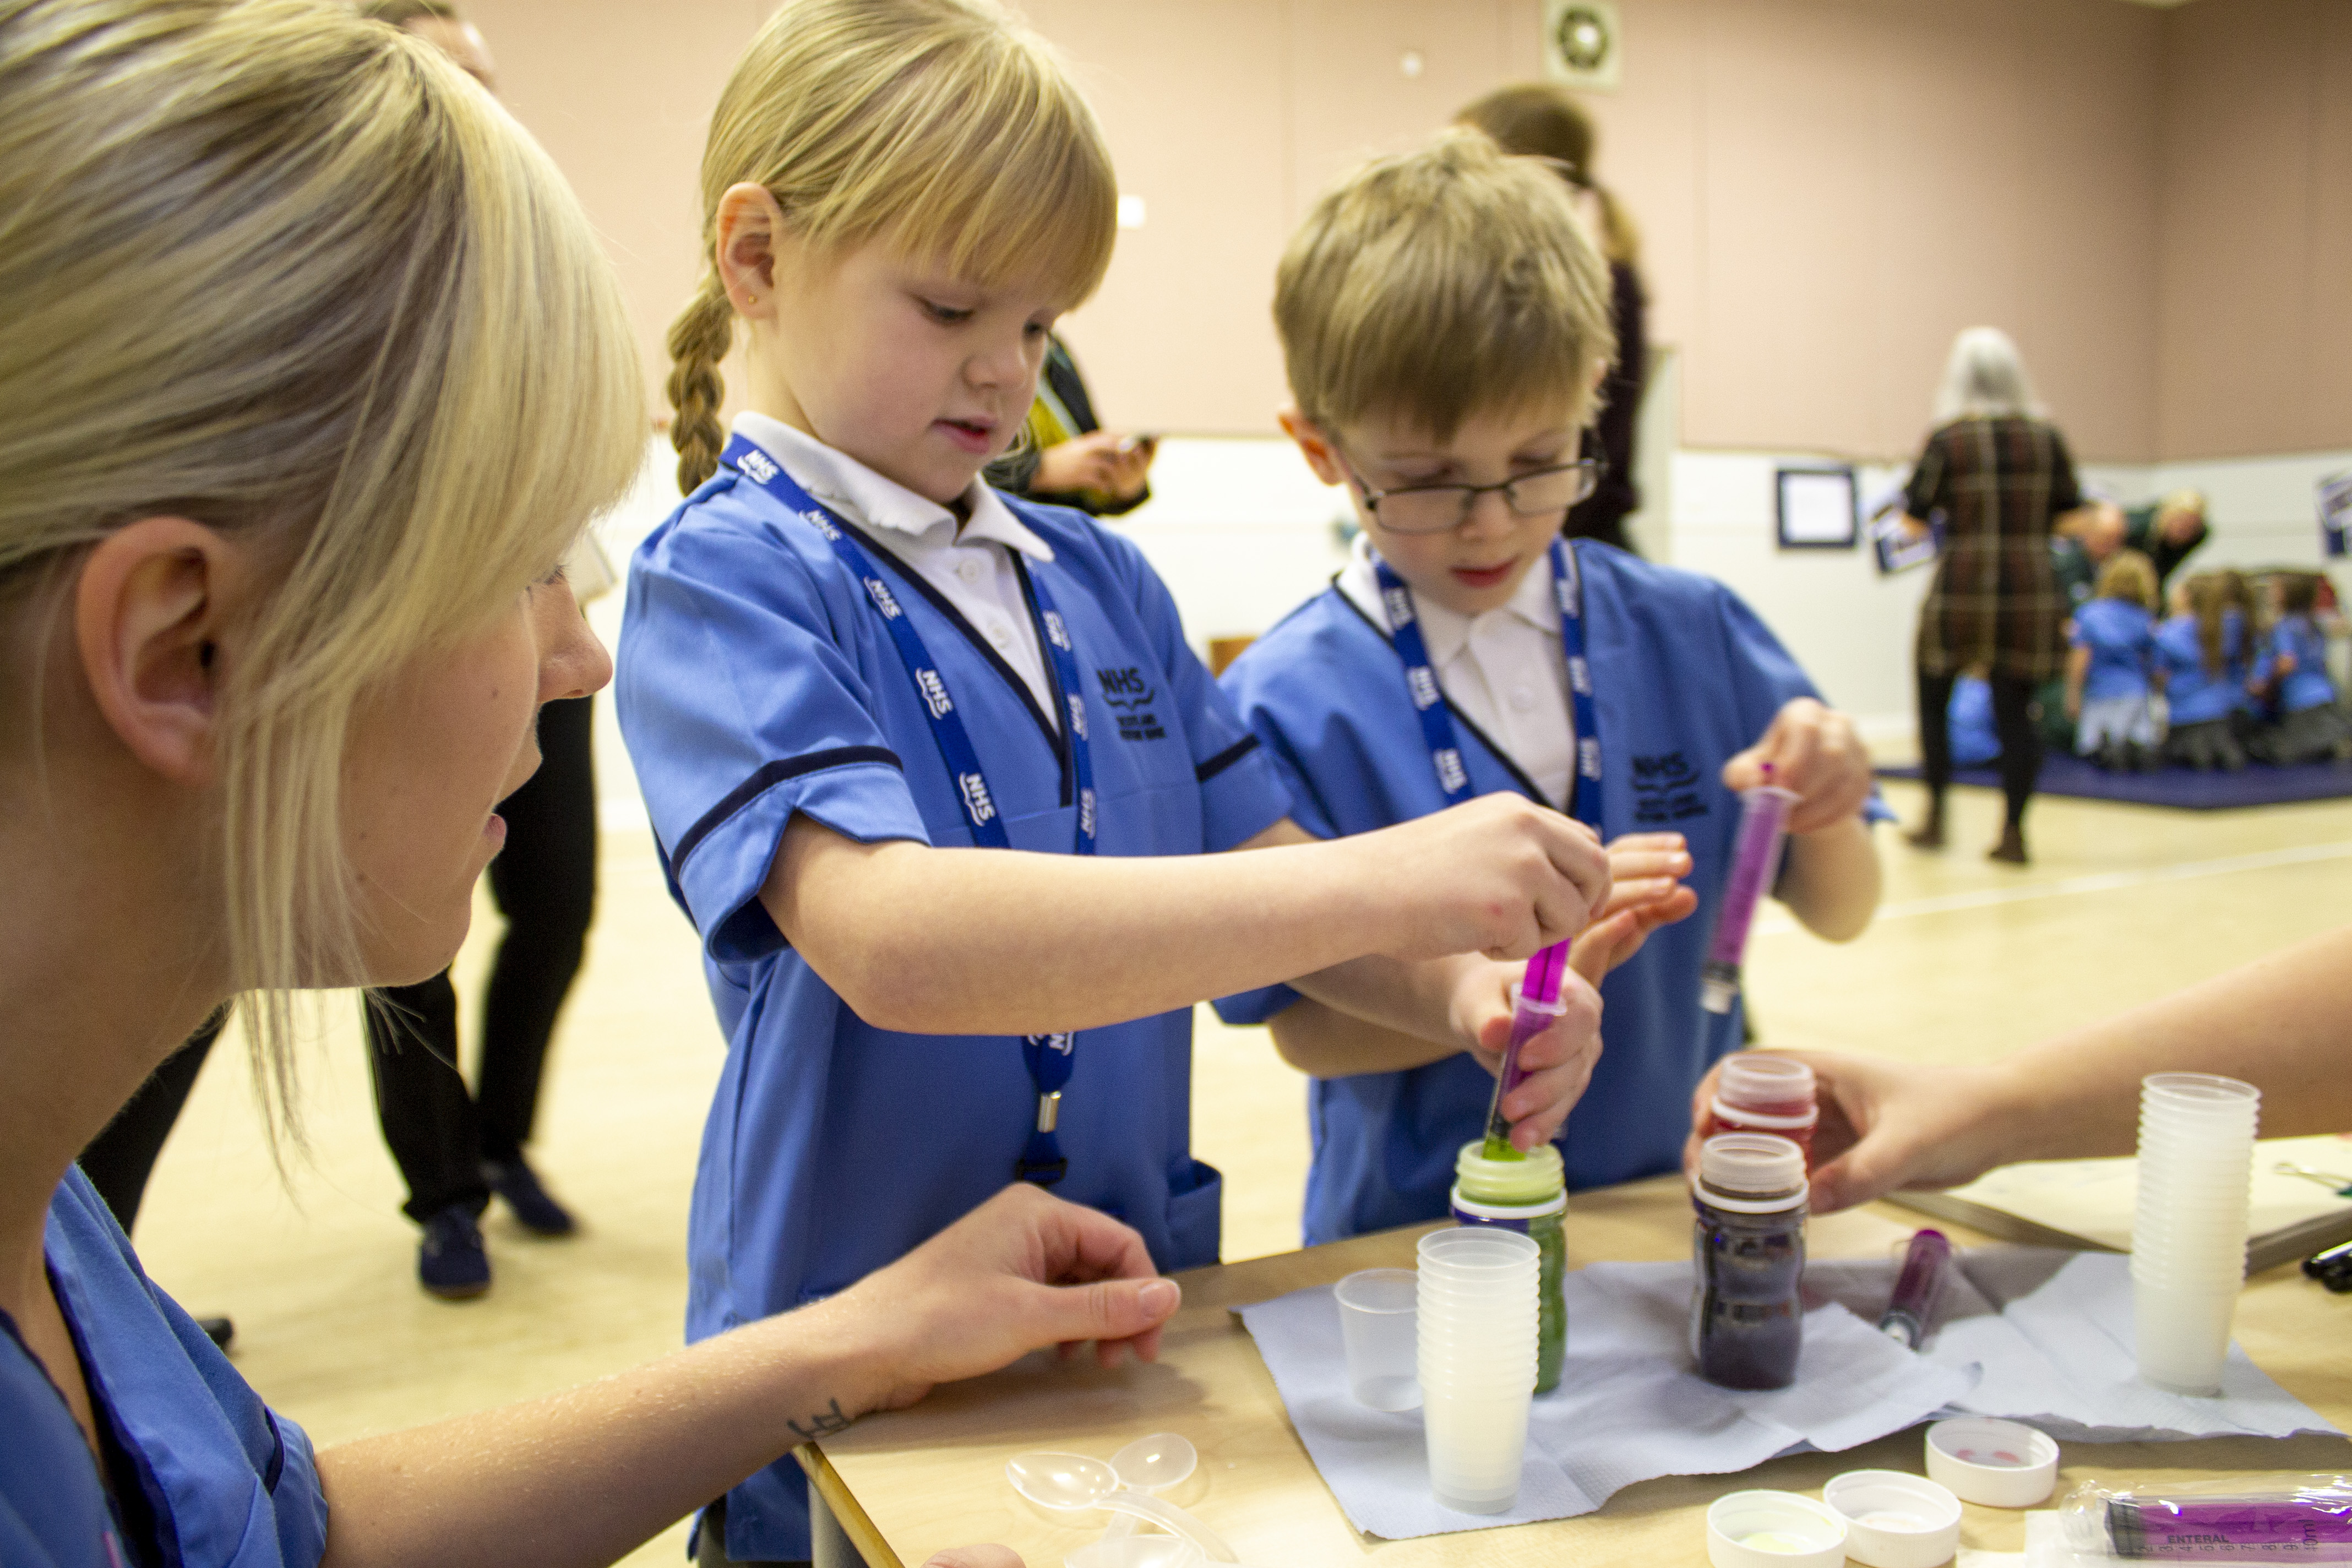 Children learn about nursing as a future career